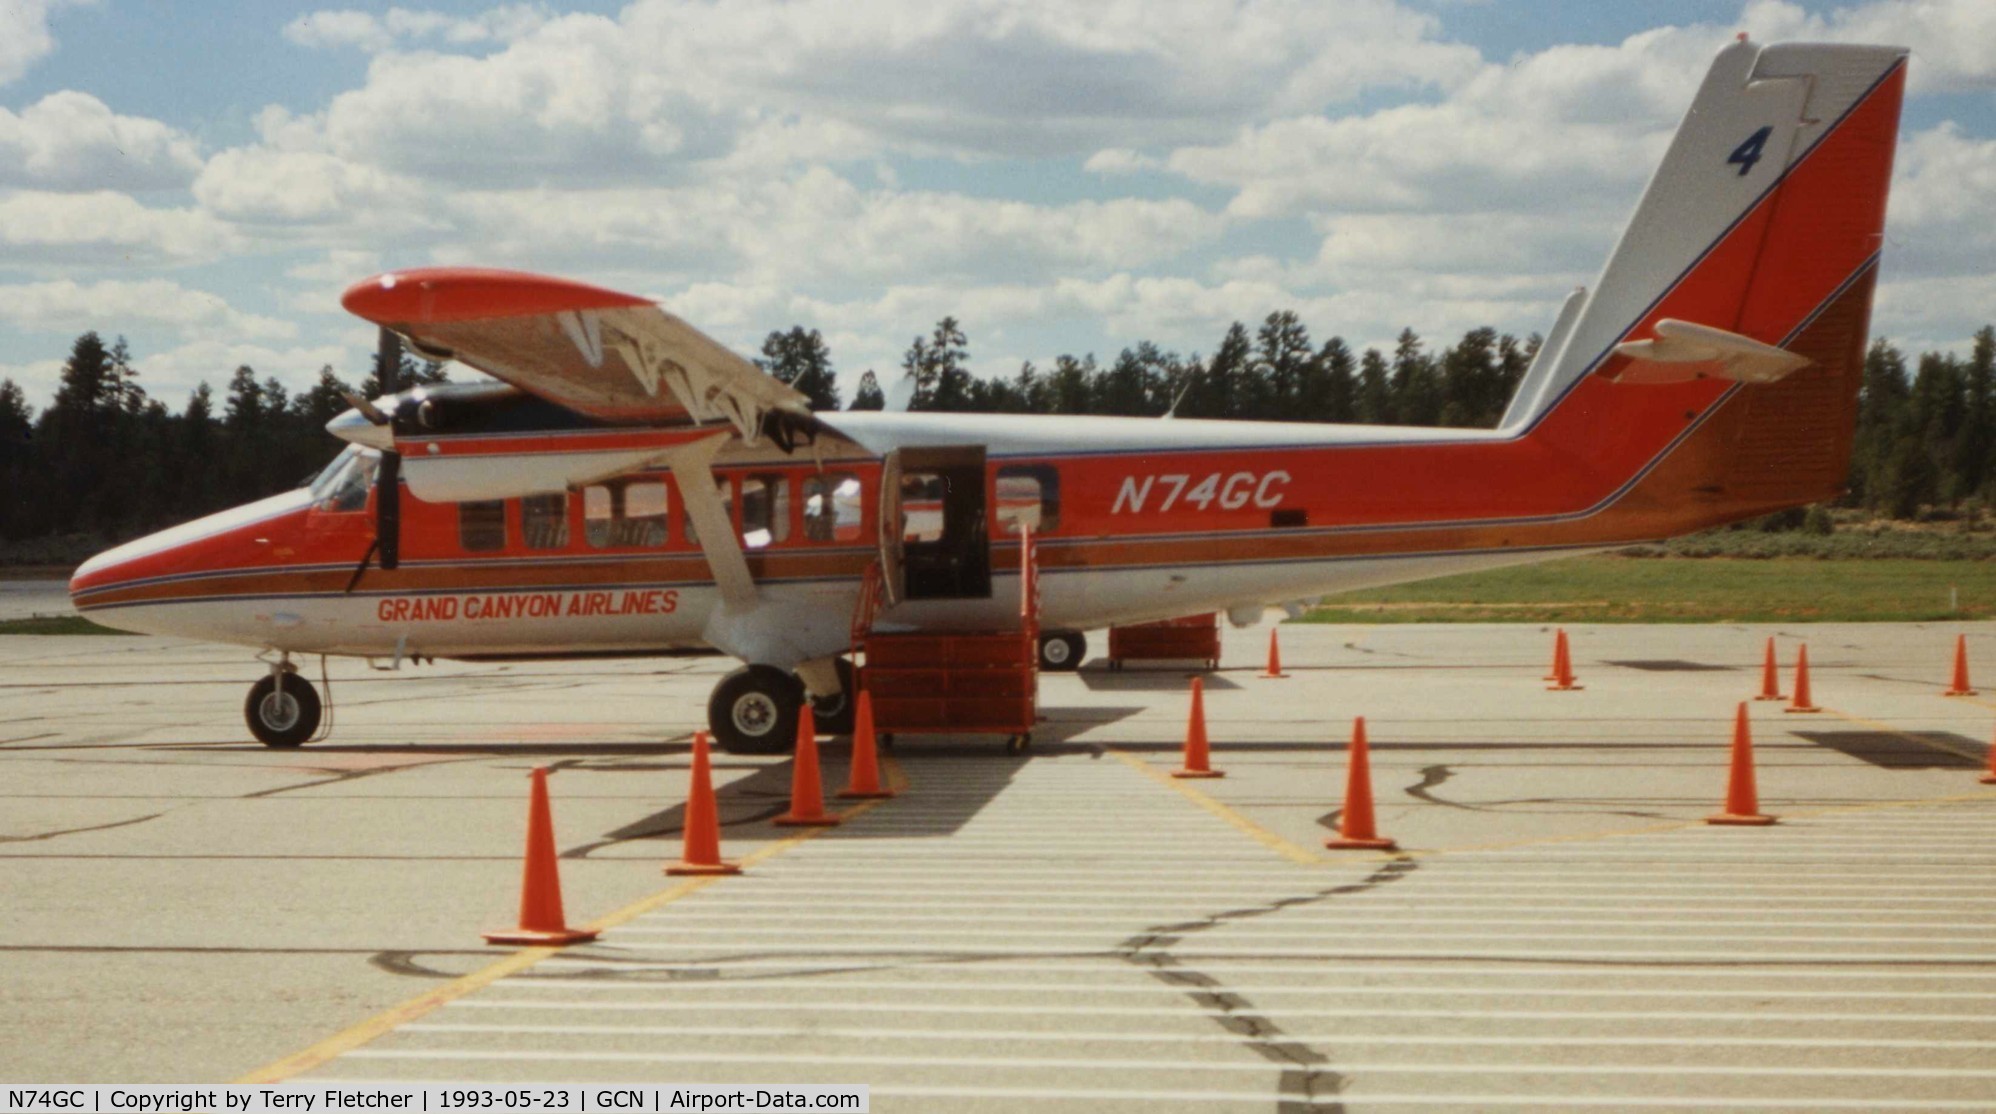 N74GC, 1977 De Havilland Canada DHC-6-300 C/N 559, Grand Canyon Airlines Twin Otter